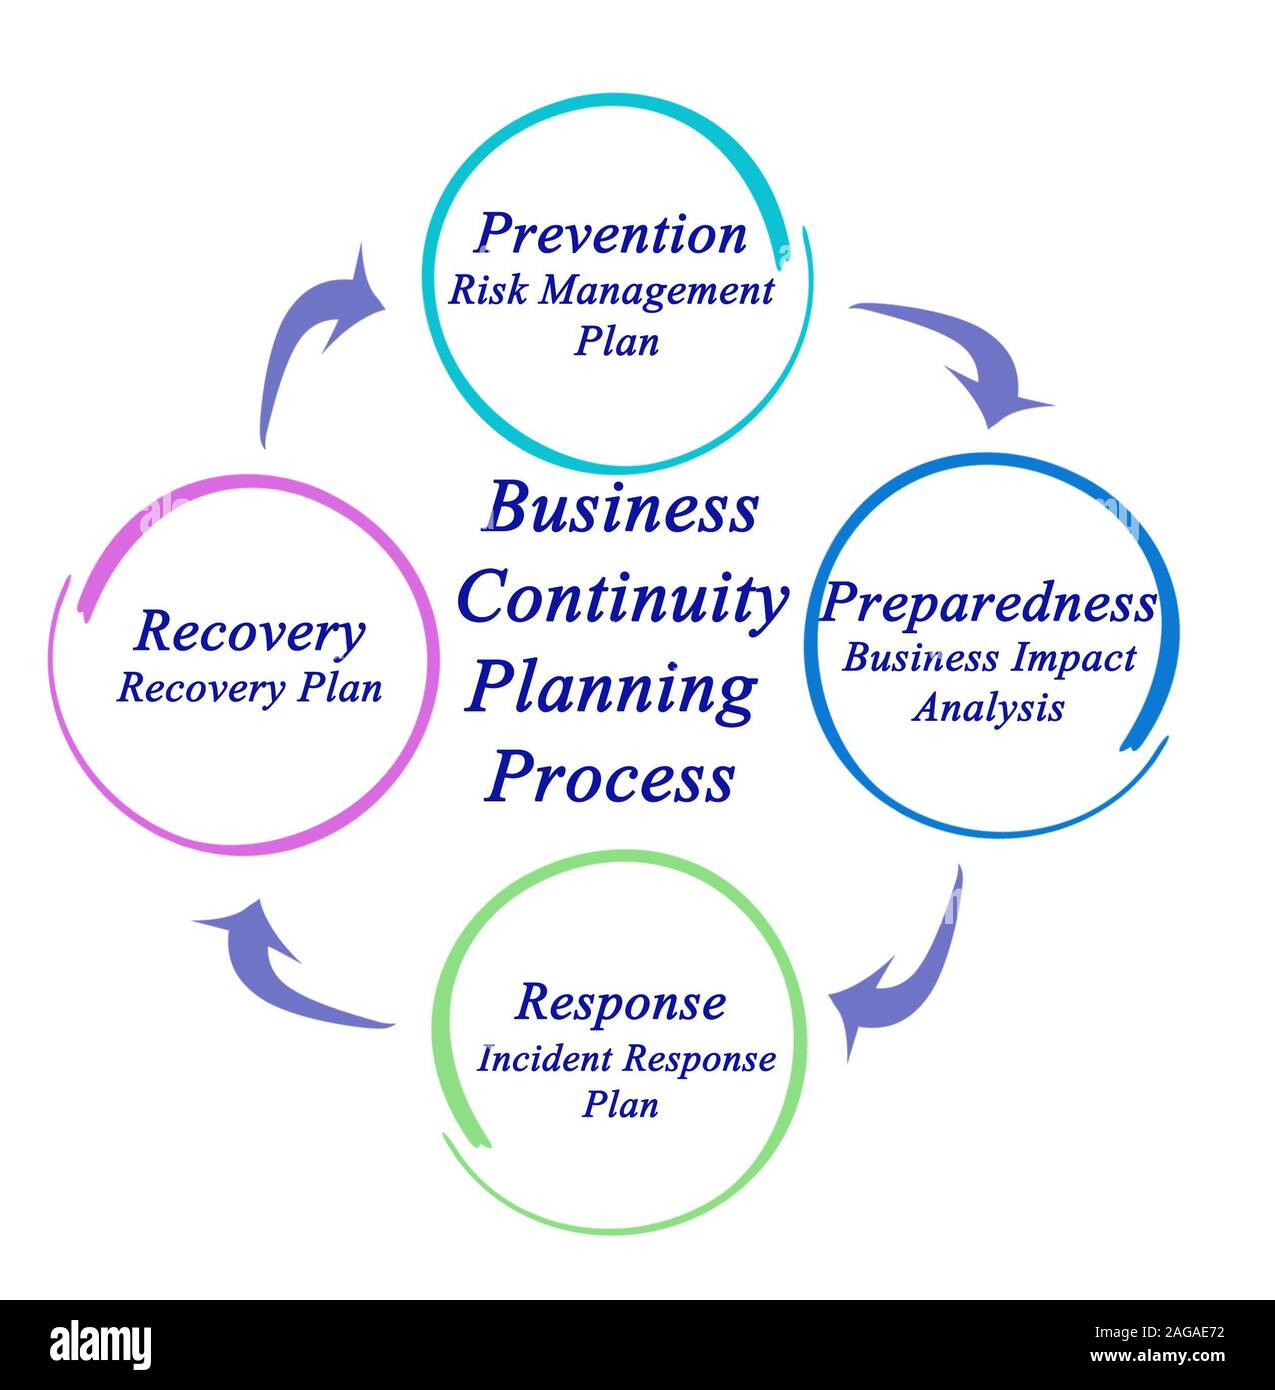 services business continuity plan